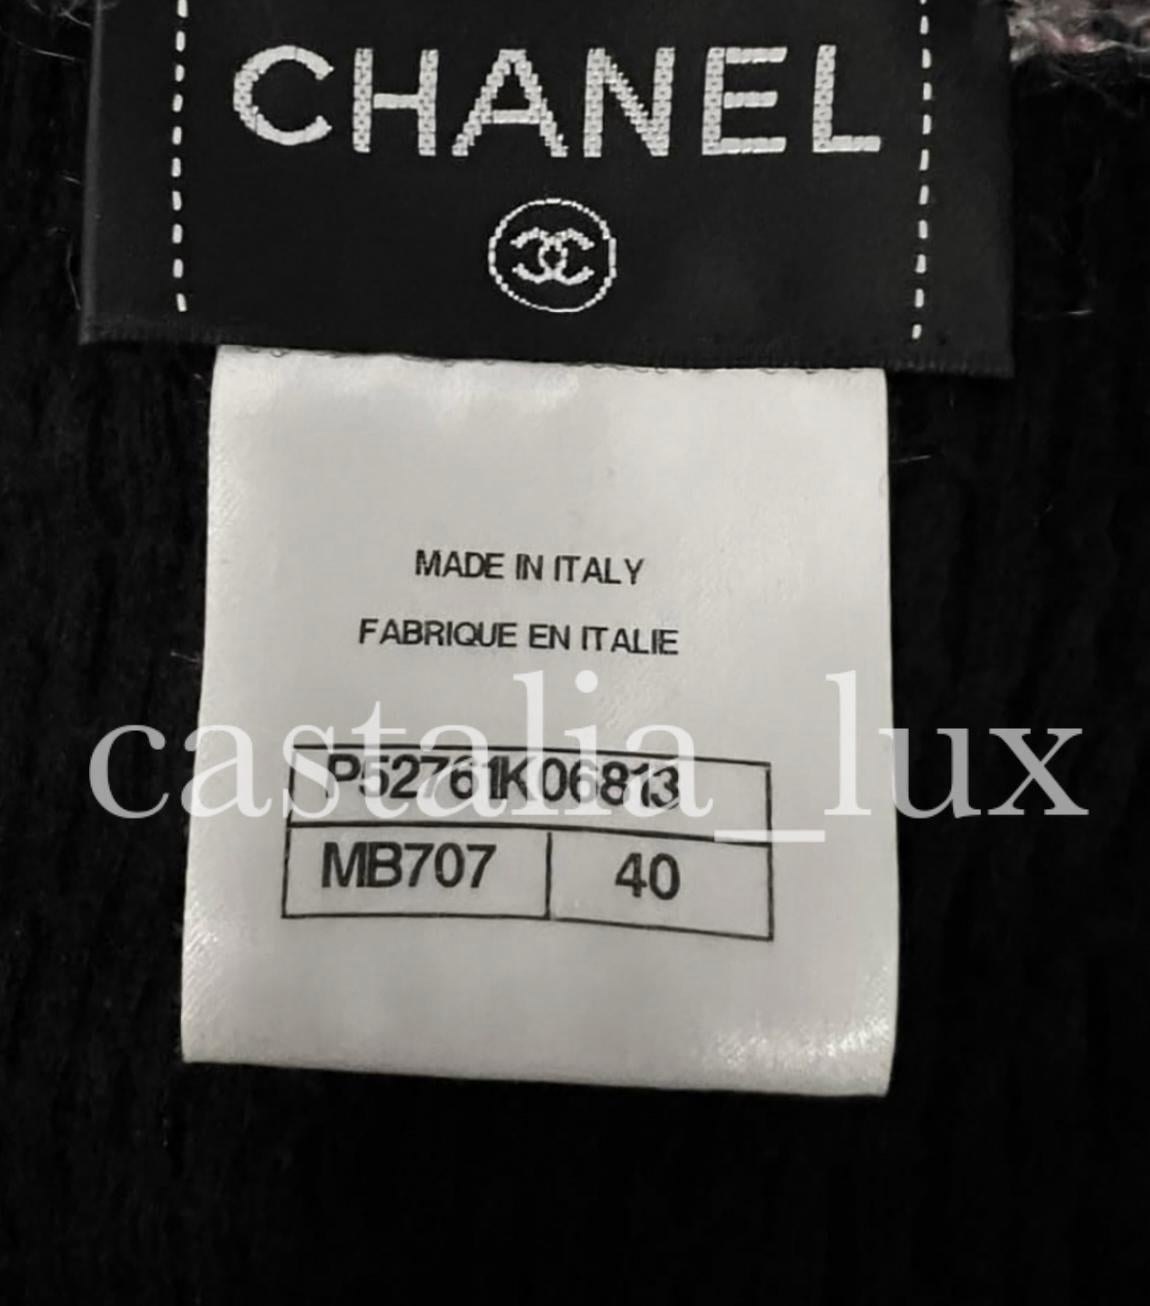 Chanel New Coco Brasserie Ad Campaign Jacket Dress For Sale 10